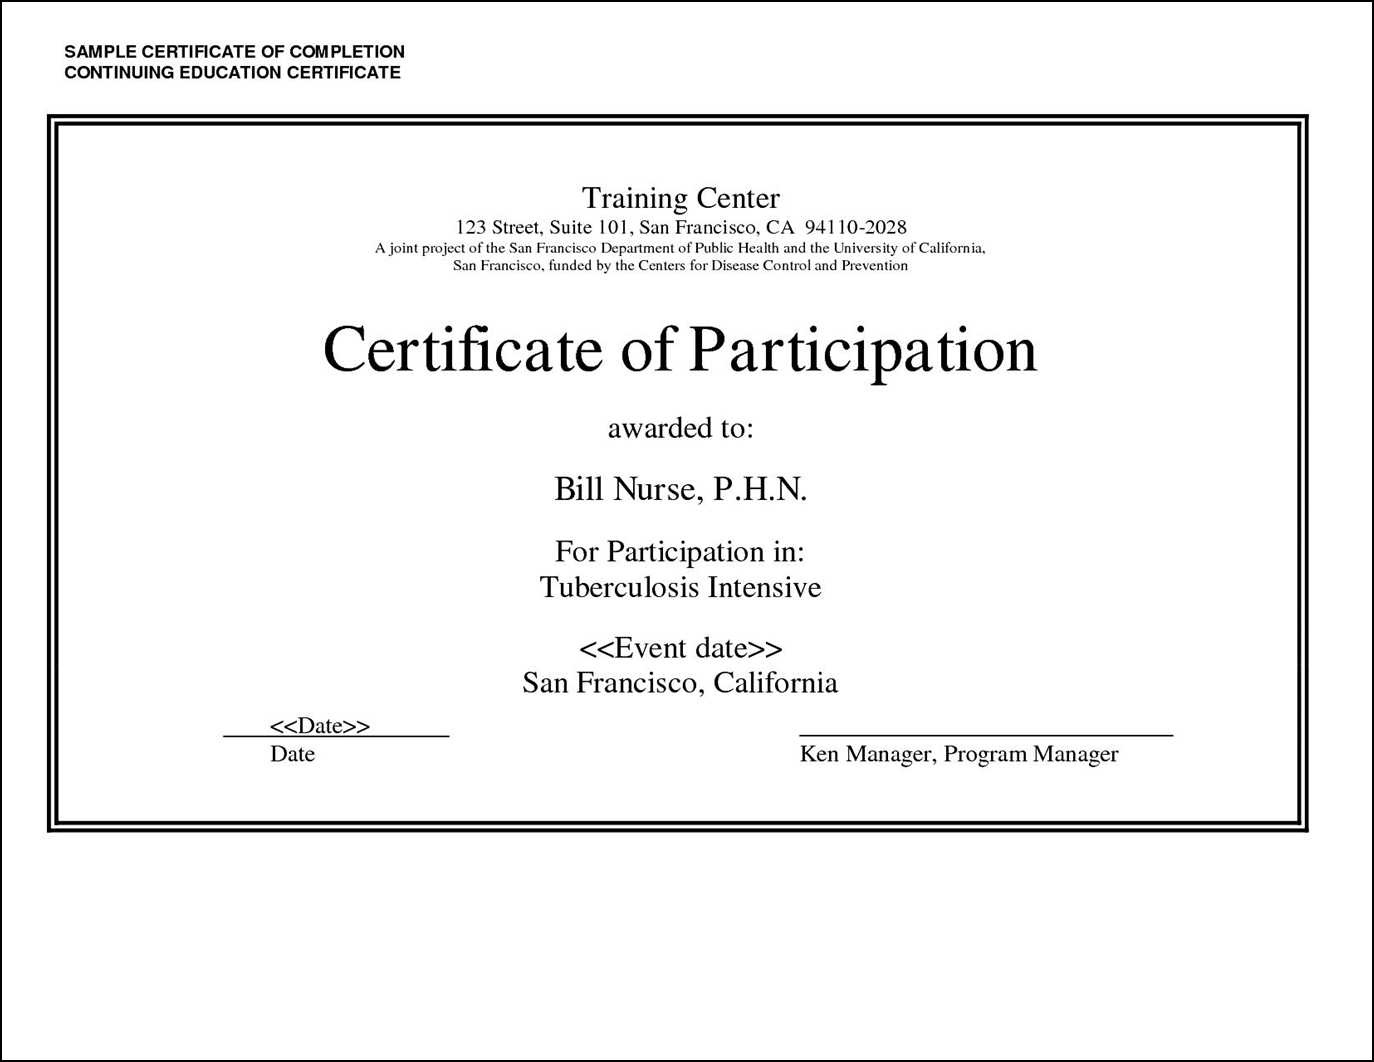 27 Images Of Adult Education Certificate Template | Masorler Throughout Continuing Education Certificate Template